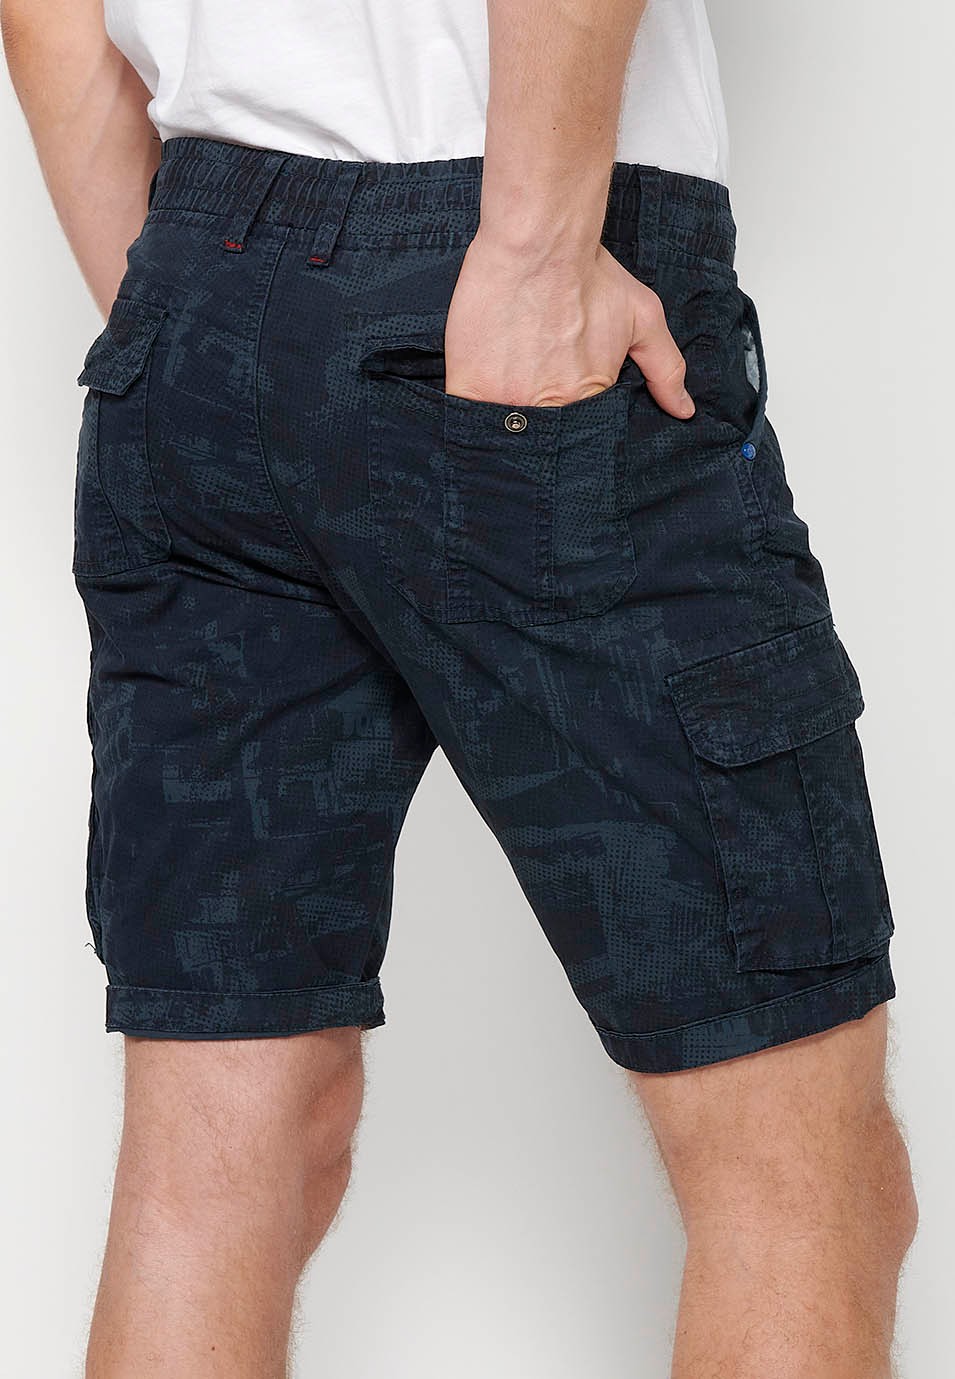 Cargo shorts with front closure with zipper and button and four pockets, two rear pockets with flap with two cargo pockets with flap and adjustable waist with drawstring in Blue for Men 2